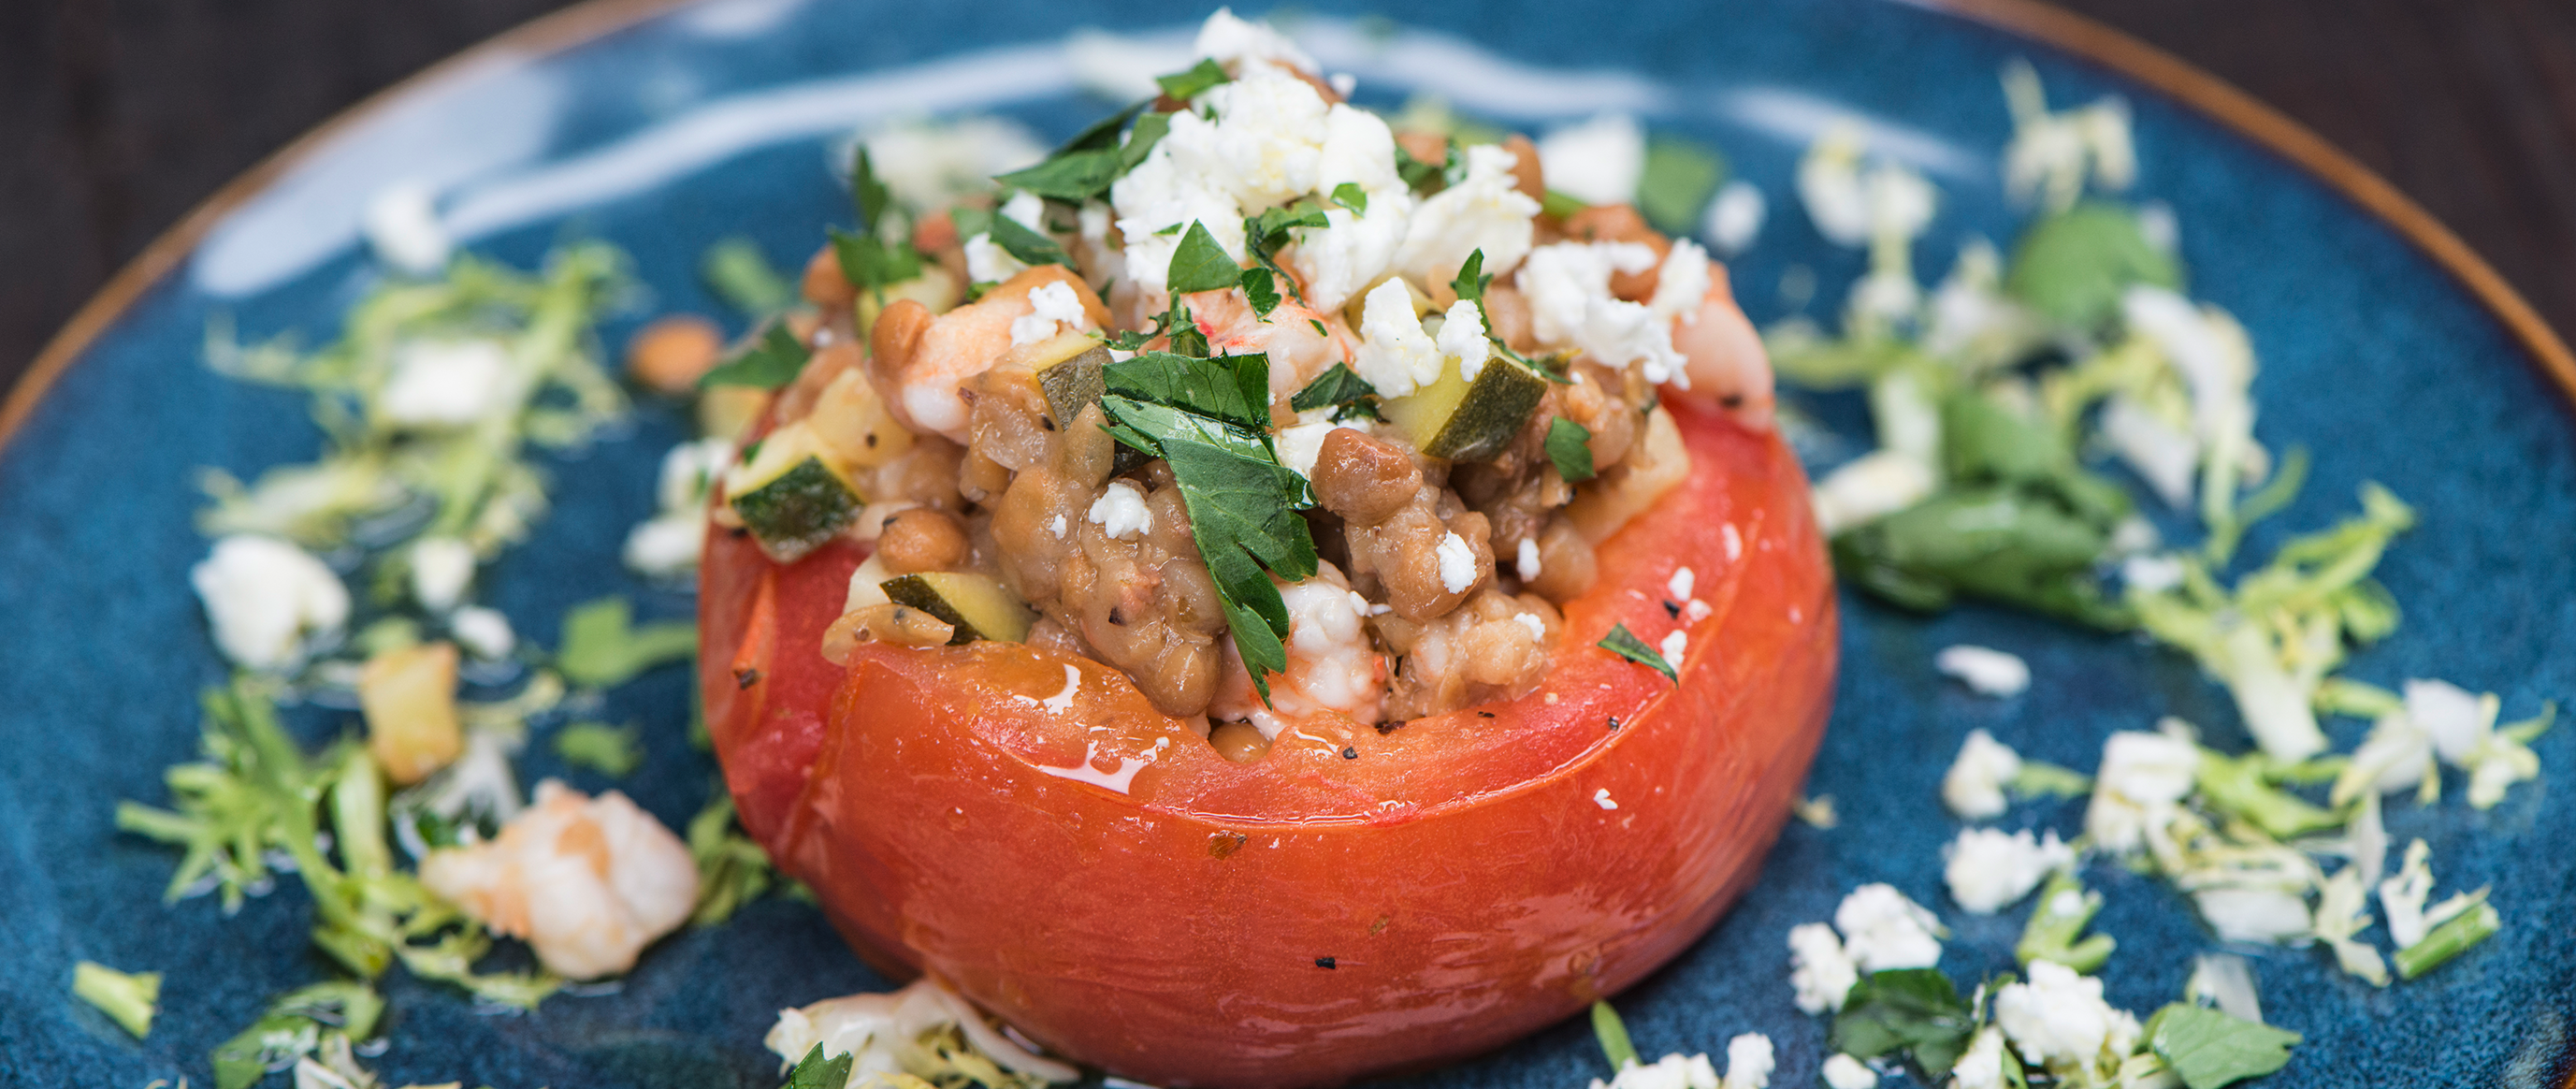 Roasted Stuffed Tomatoes with Lentils, Zucchini and Shrimp